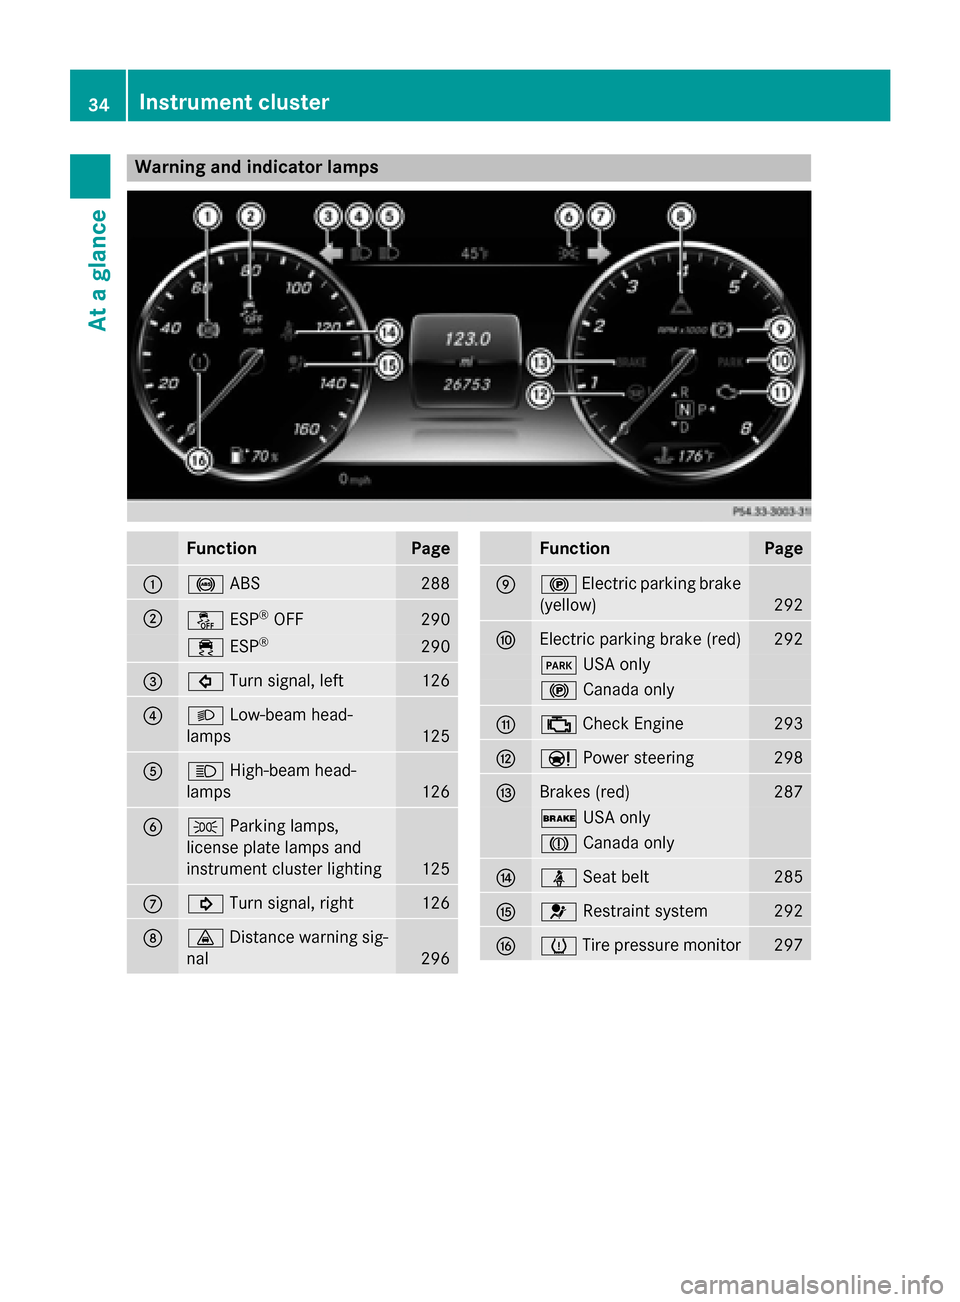 MERCEDES-BENZ S-Class COUPE 2016 C217 Owners Guide Warning and indicator lamps
FunctionPage
:!ABS288
;åESP®OFF290
÷ESP®290
=#Turn signal, left126
?LLow-beam head-
lamps
125
AK High-beam head-
lamps
126
BT Parking lamps,
license plate lamps and
ins